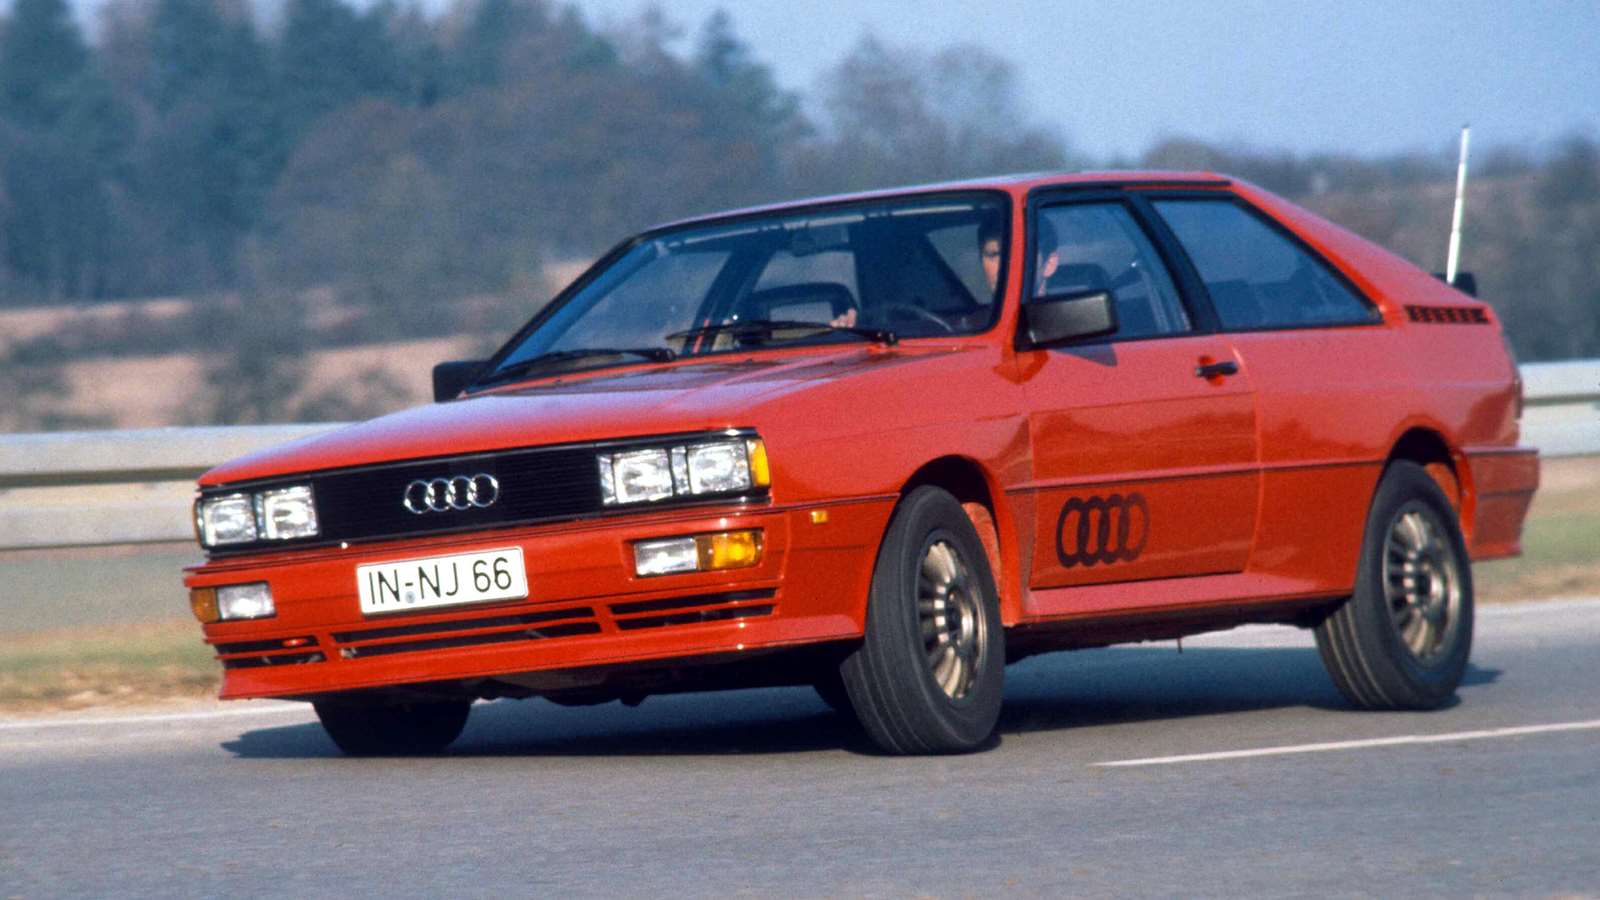 Find of the Day: 1983 Audi 80 quattro Works Rally - Audi Club